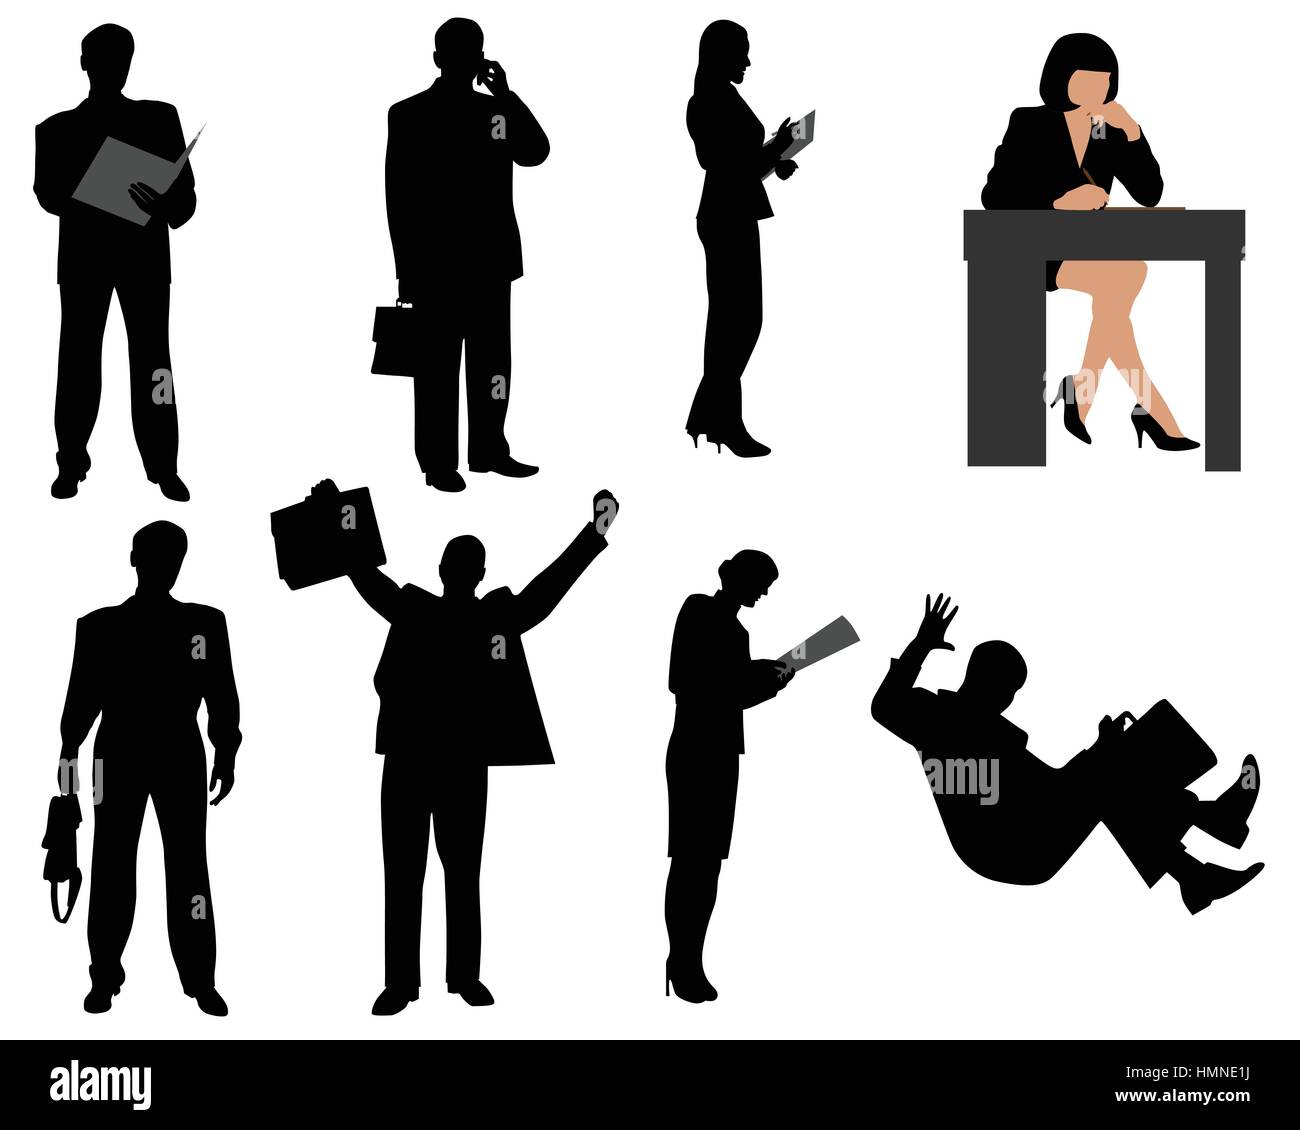 Silhouettes of business persons, officers, clerks and managers Stock Vector